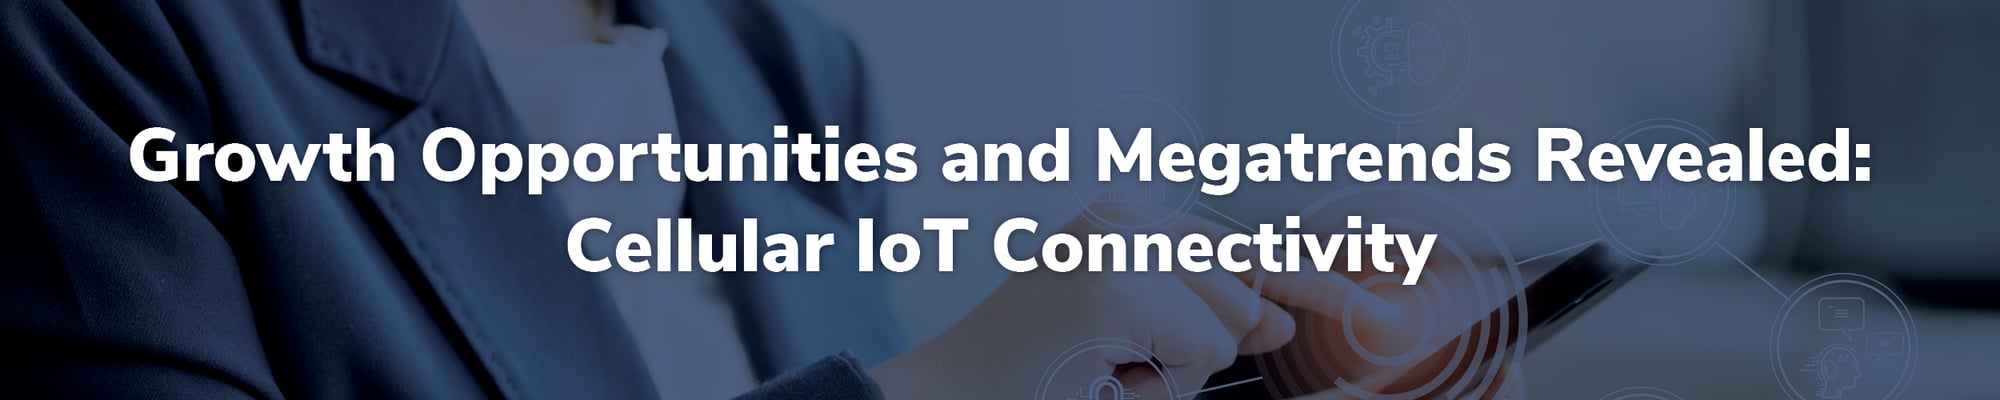 Cellular IoT connectivity